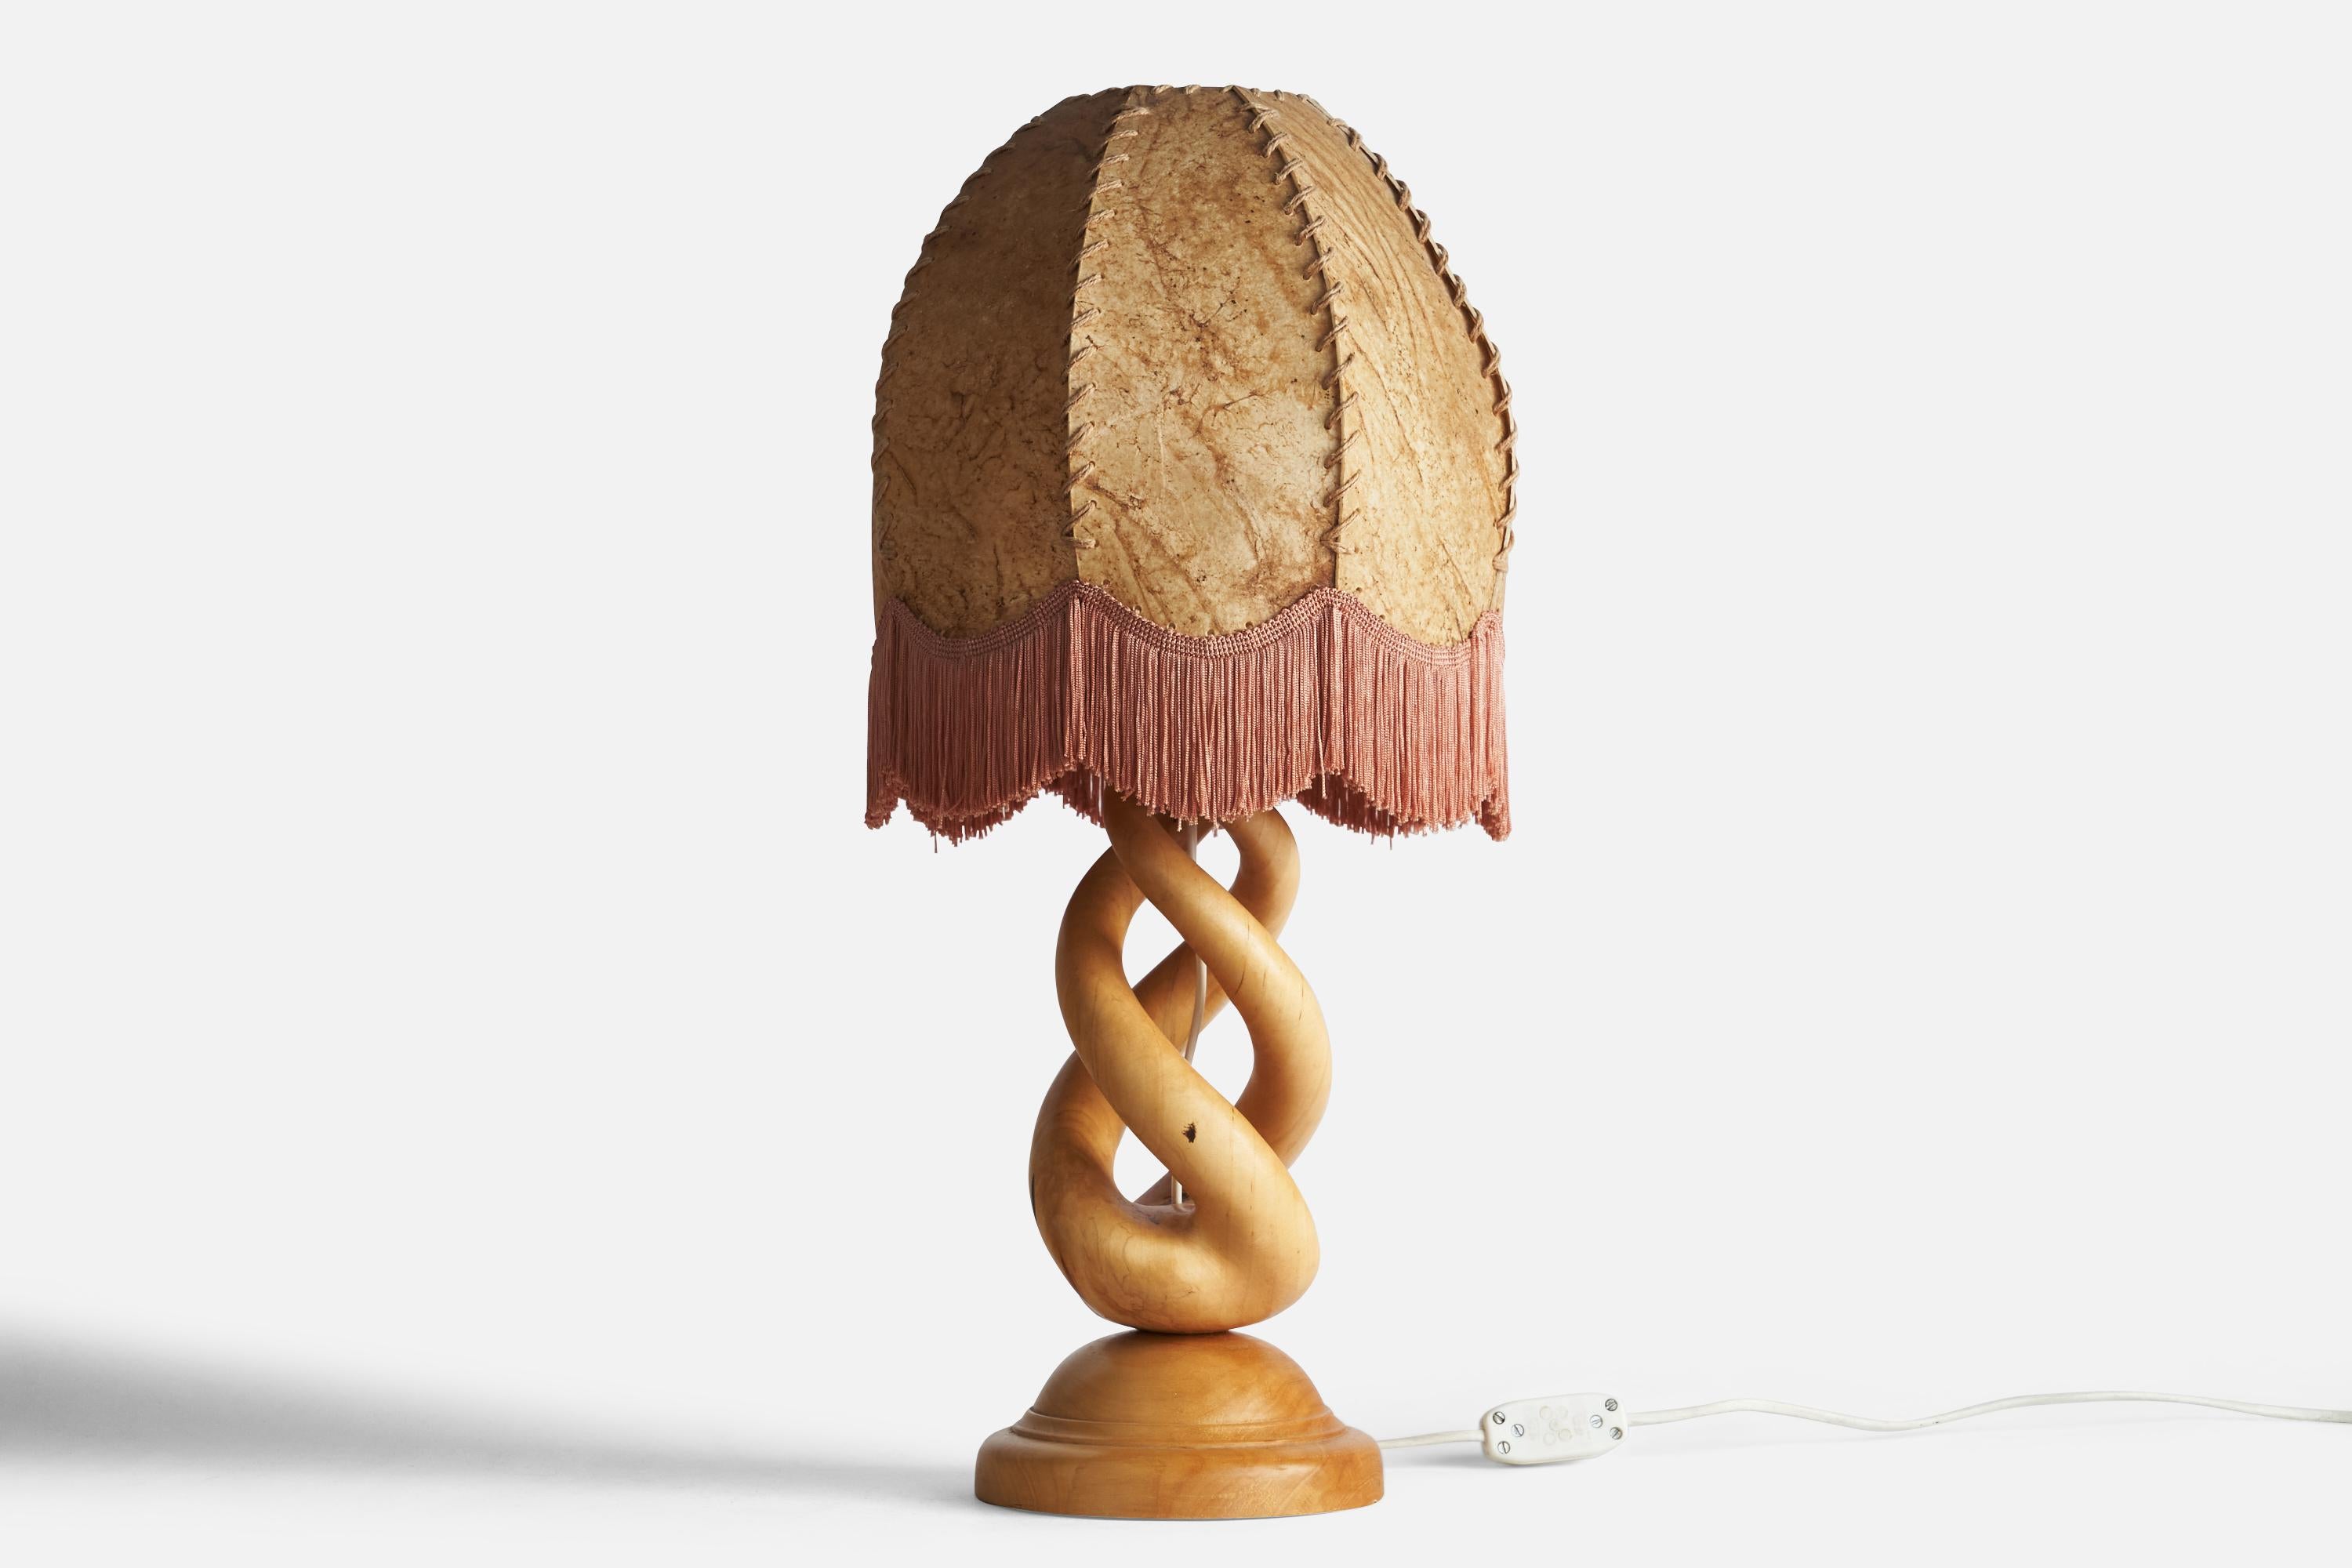 A freeform birch, beige parchment paper and pink fabric string table lamp designed and produced in Sweden, c. 1970s.

Overall Dimensions (inches): 21.55” H x 10” Diameter
Bulb Specifications: E-26 Bulb
Number of Sockets: 1
All lighting will be